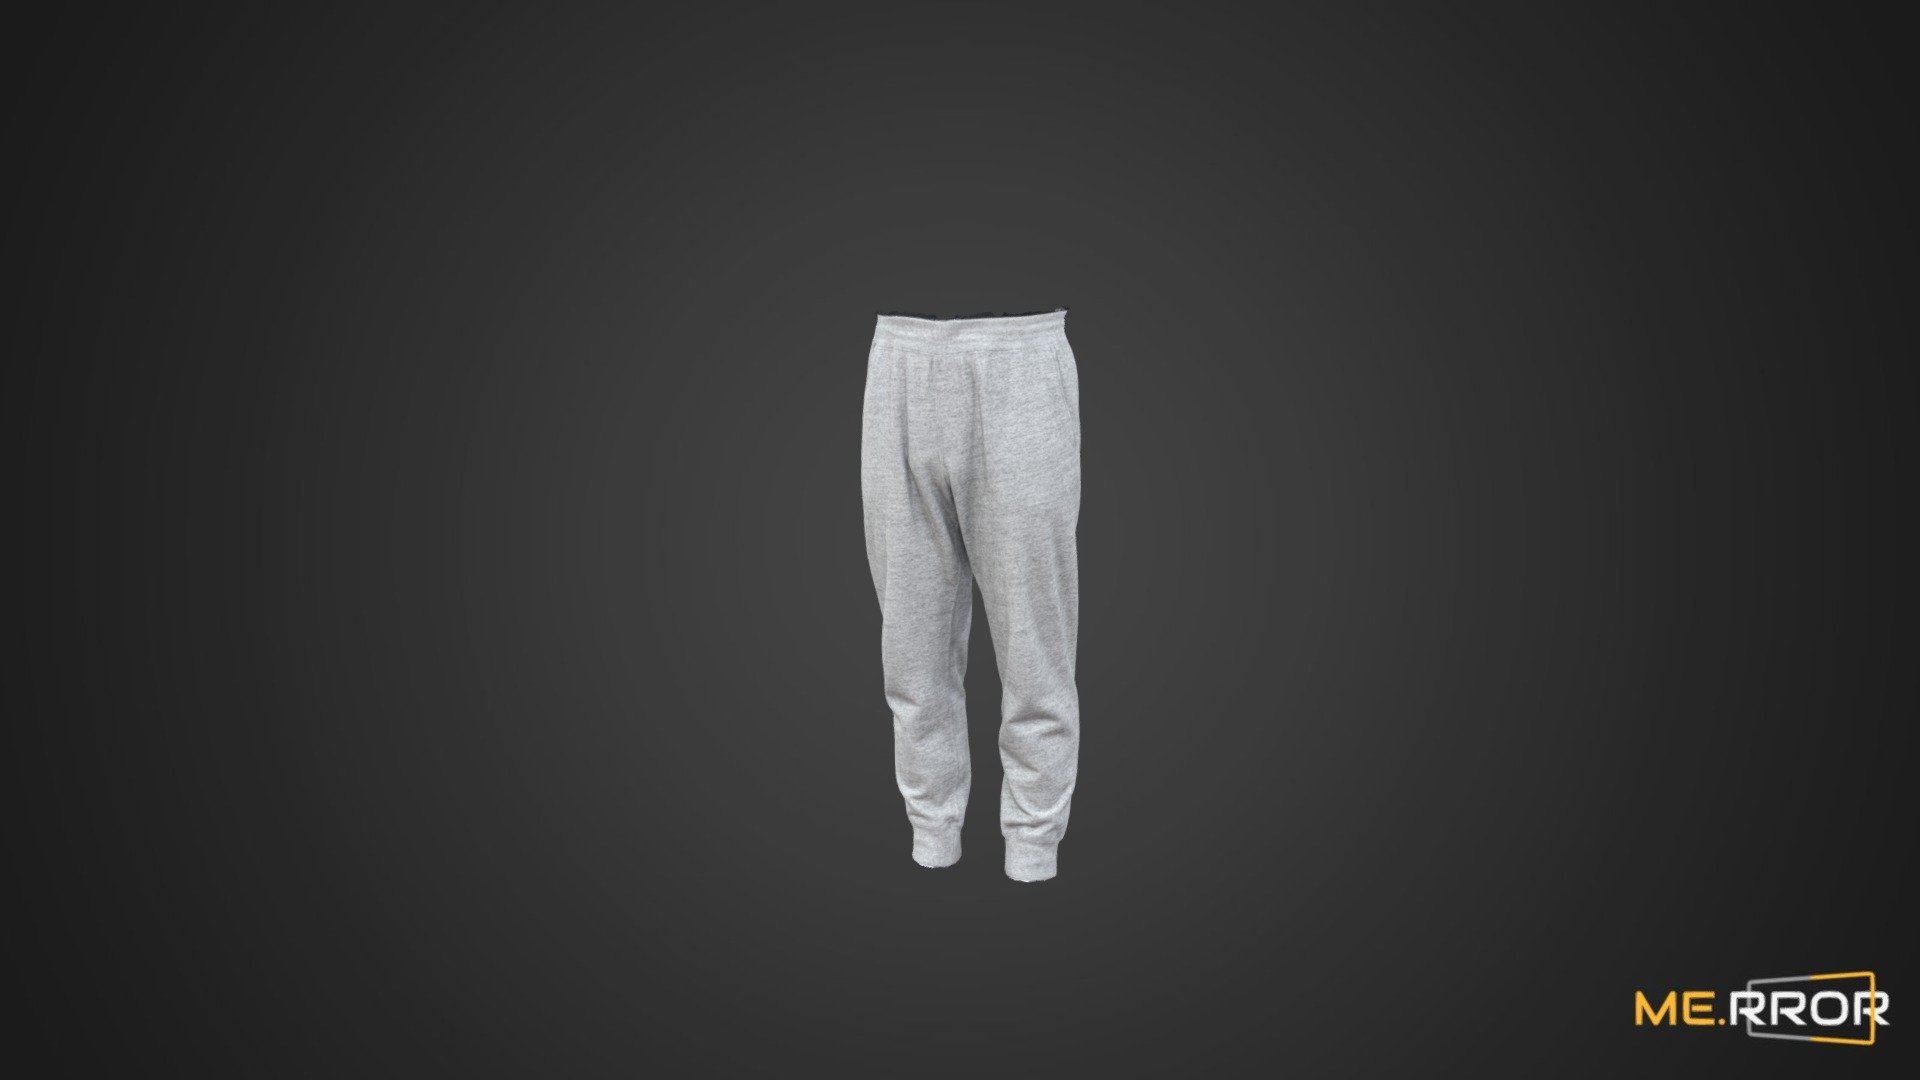 MERROR is a 3D Content PLATFORM which introduces various Asian assets to the 3D world


3DScanning #Photogrametry #ME.RROR - Gray Sweat pants - Buy Royalty Free 3D model by ME.RROR Studio (@merror) 3d model